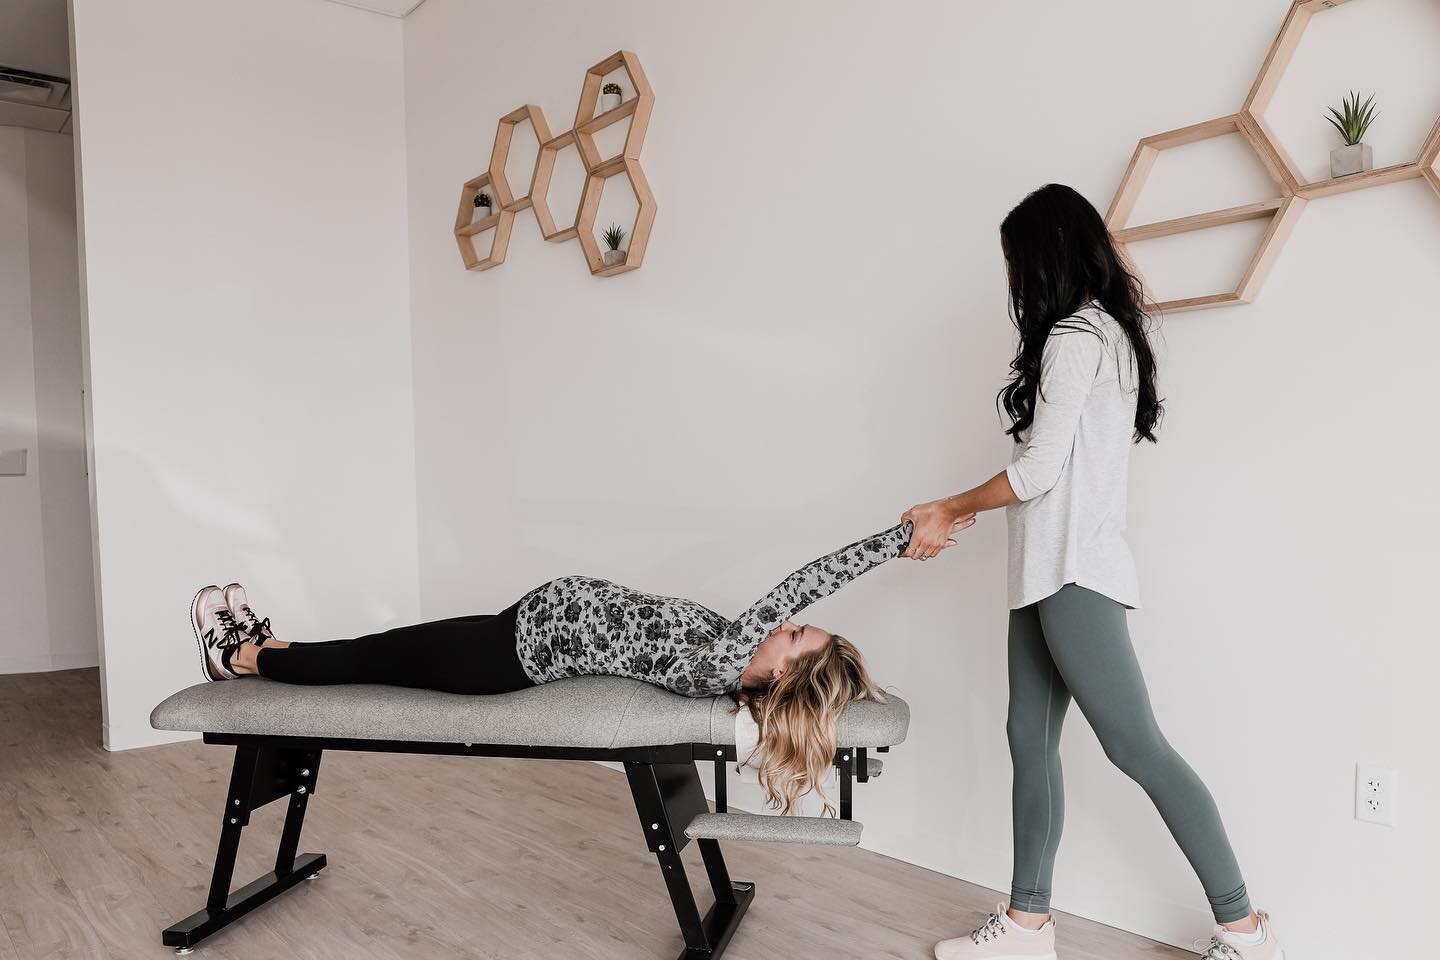 Chiropractic care...SO MANY BENEFITS!! 

I M P R O V E S 

🌿 Balance + gait
🌿 Ranges of motion
🌿 Sleep quality 
🌿 Sleep comfort
🌿 Energy levels
🌿 Headaches + Migraines
🌿 Neck pain 
🌿 Mid/low back pain
🌿 Sacral pain
🌿 Sciatic pain
🌿 Digesti